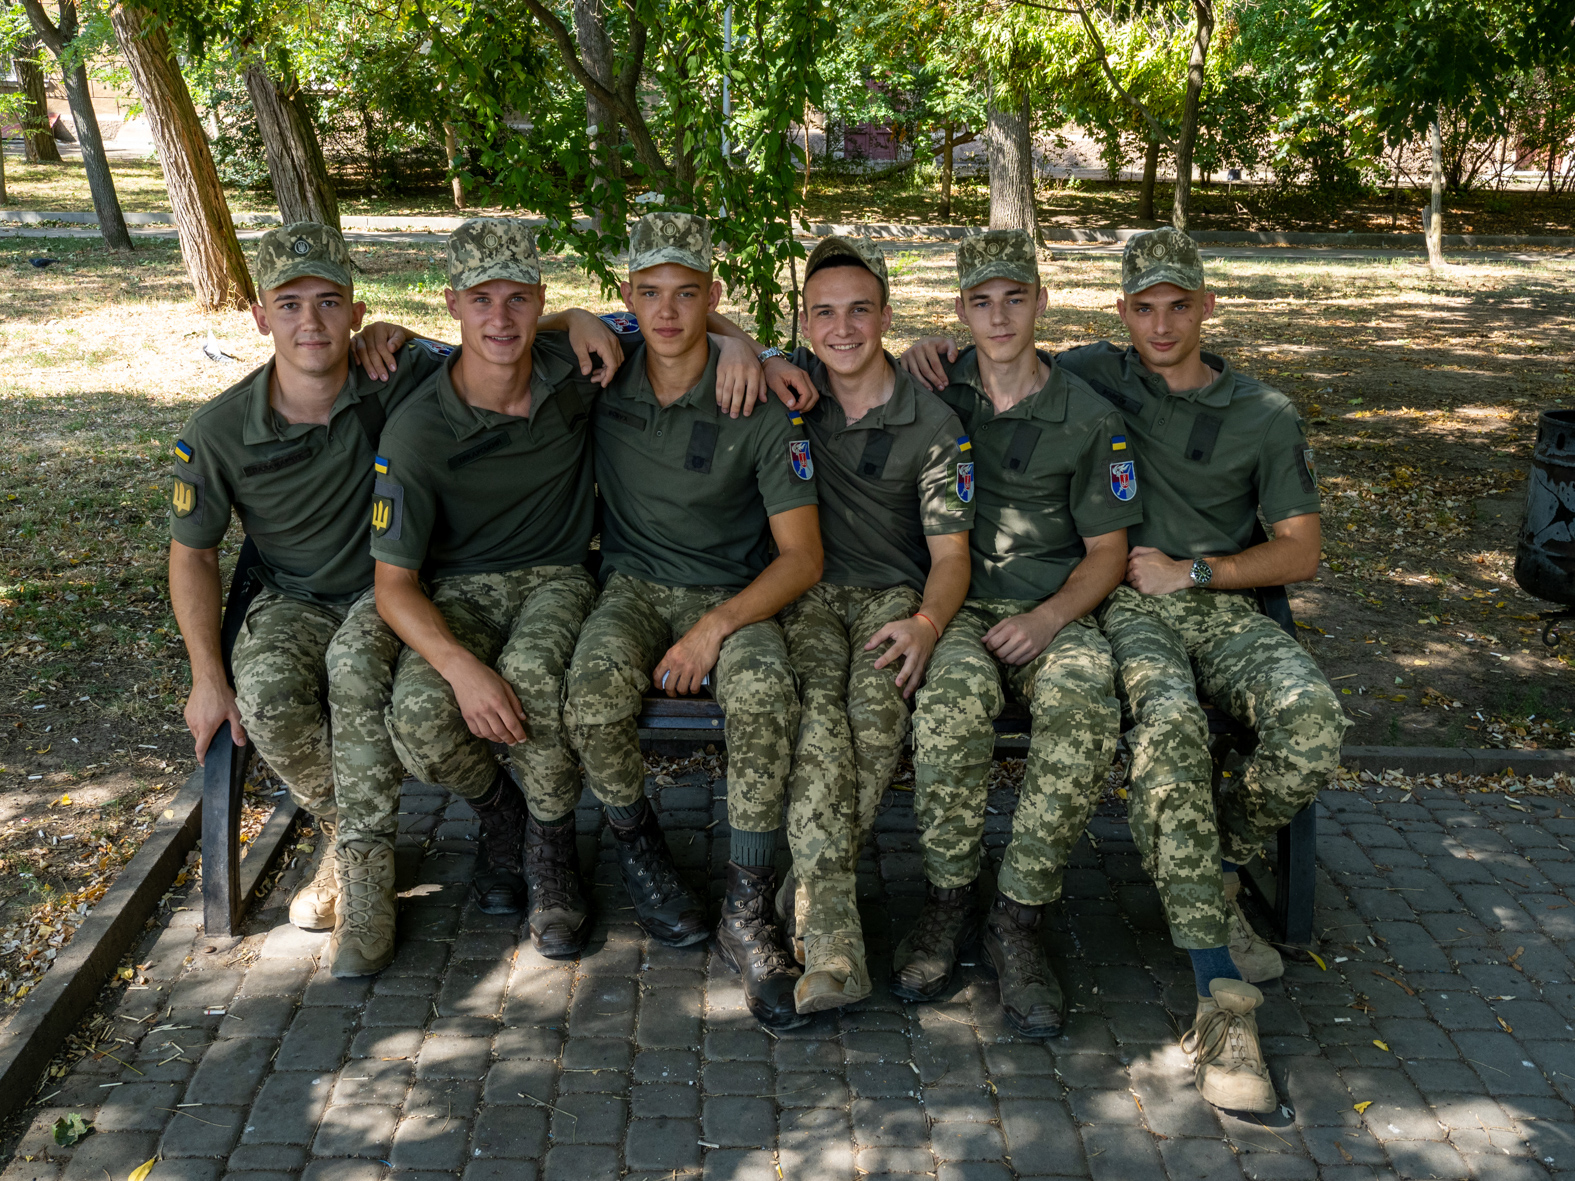 ODESSA, UKRAINE - AUGUST 28: Military Cadets relax in a park during a break from training in Odessa on August 28, 2023 in Odessa, Ukraine. The Odessa Military Academy is a modern higher military institution of the inter-services Armed Forces of Ukraine. It is one of the oldest military academies in the former Russian Empire, having been active for more than a century. (Photo by Peter Dench/Getty Images)